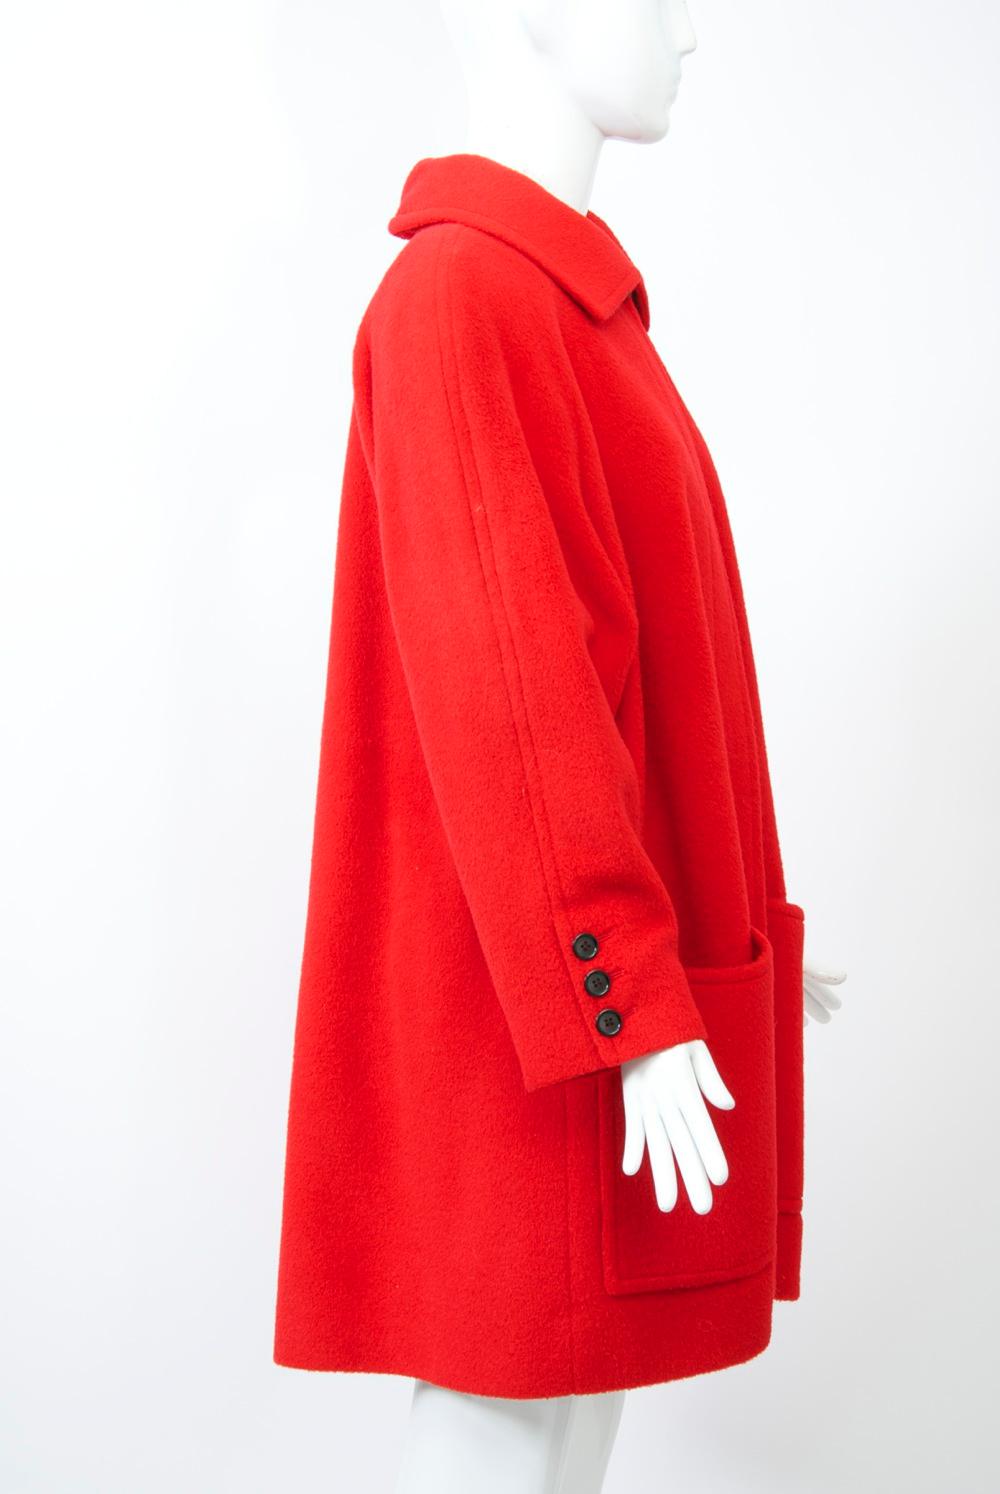 Tiktiner Short Red Coat In Excellent Condition In Alford, MA